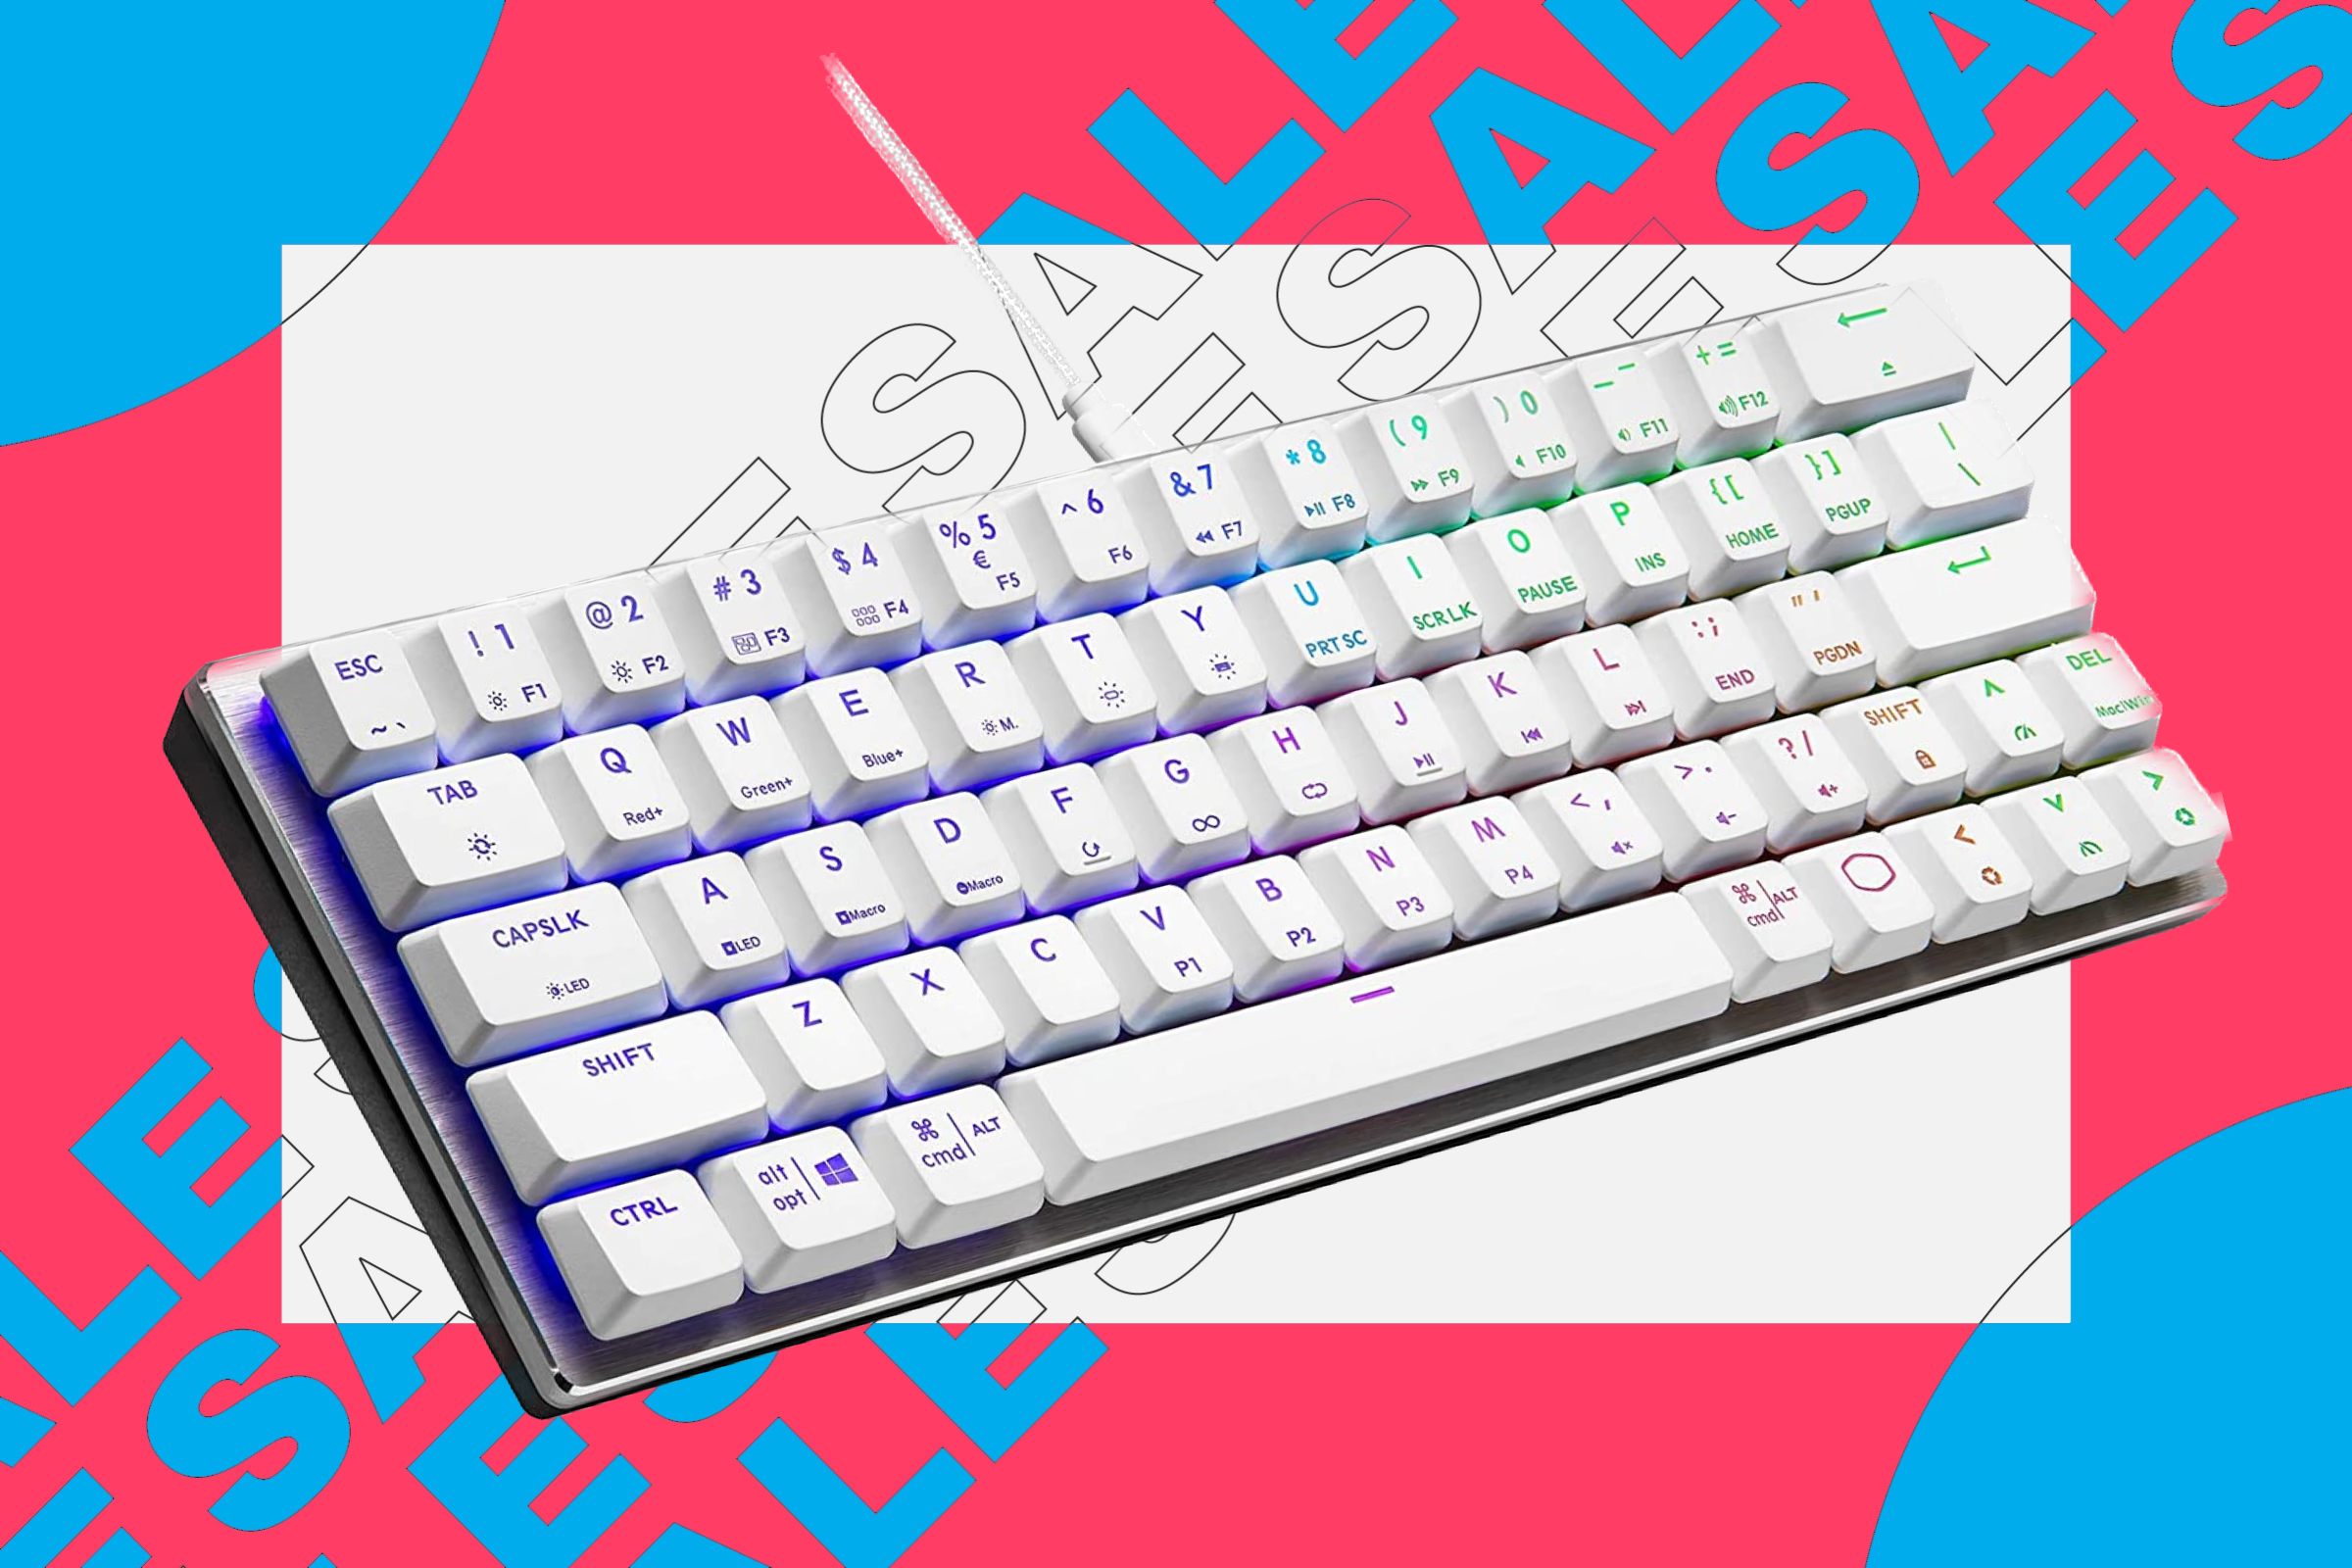 This Cooler Master mechanical keyboard with RGB and low-profile switches is now 53% off for Black Friday